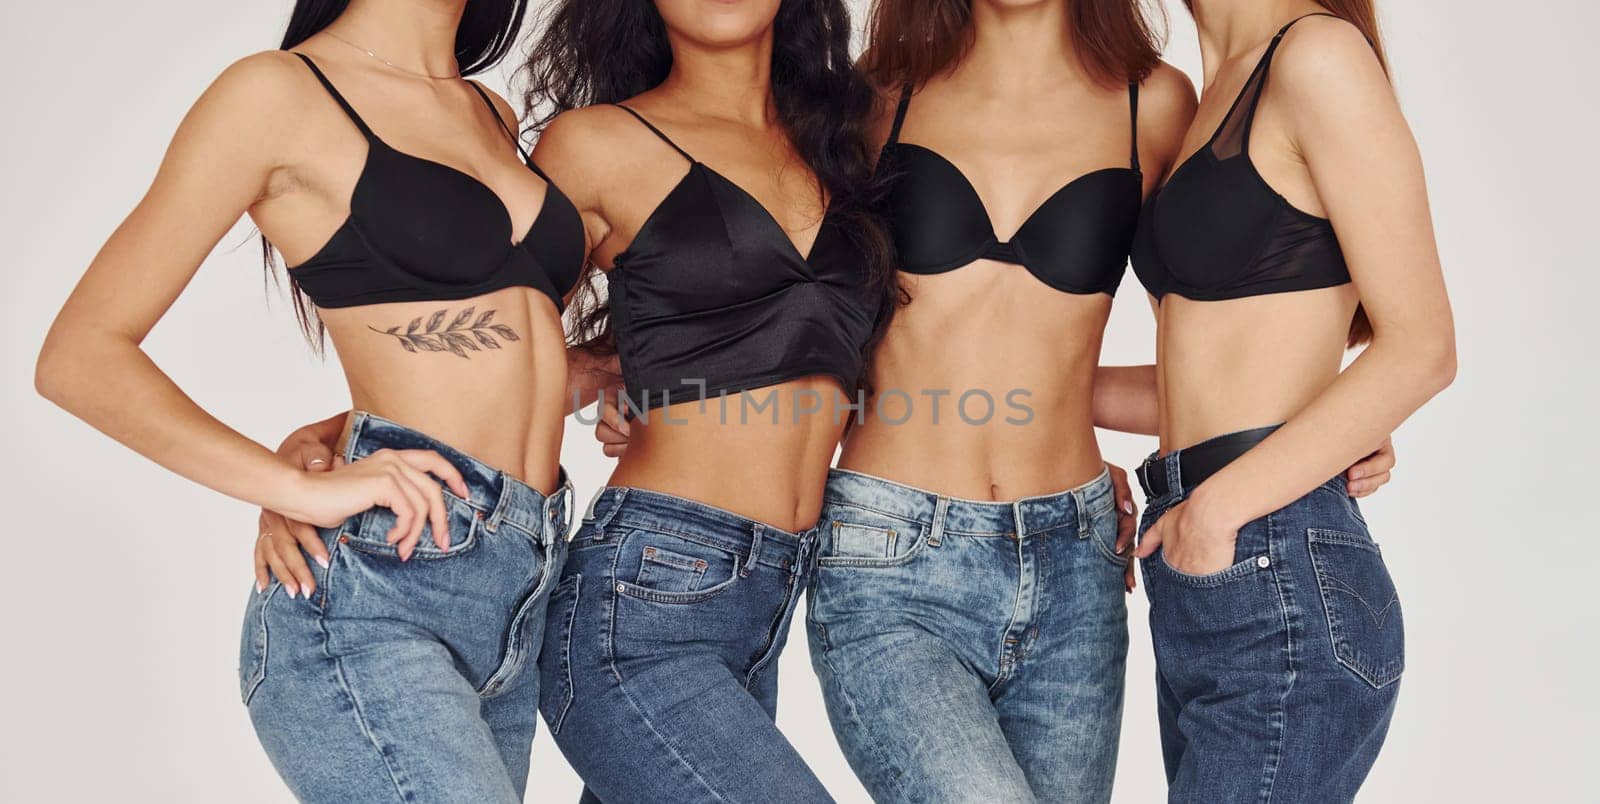 Close up view of bodies. Four young women in lingerie together indoors. White background.